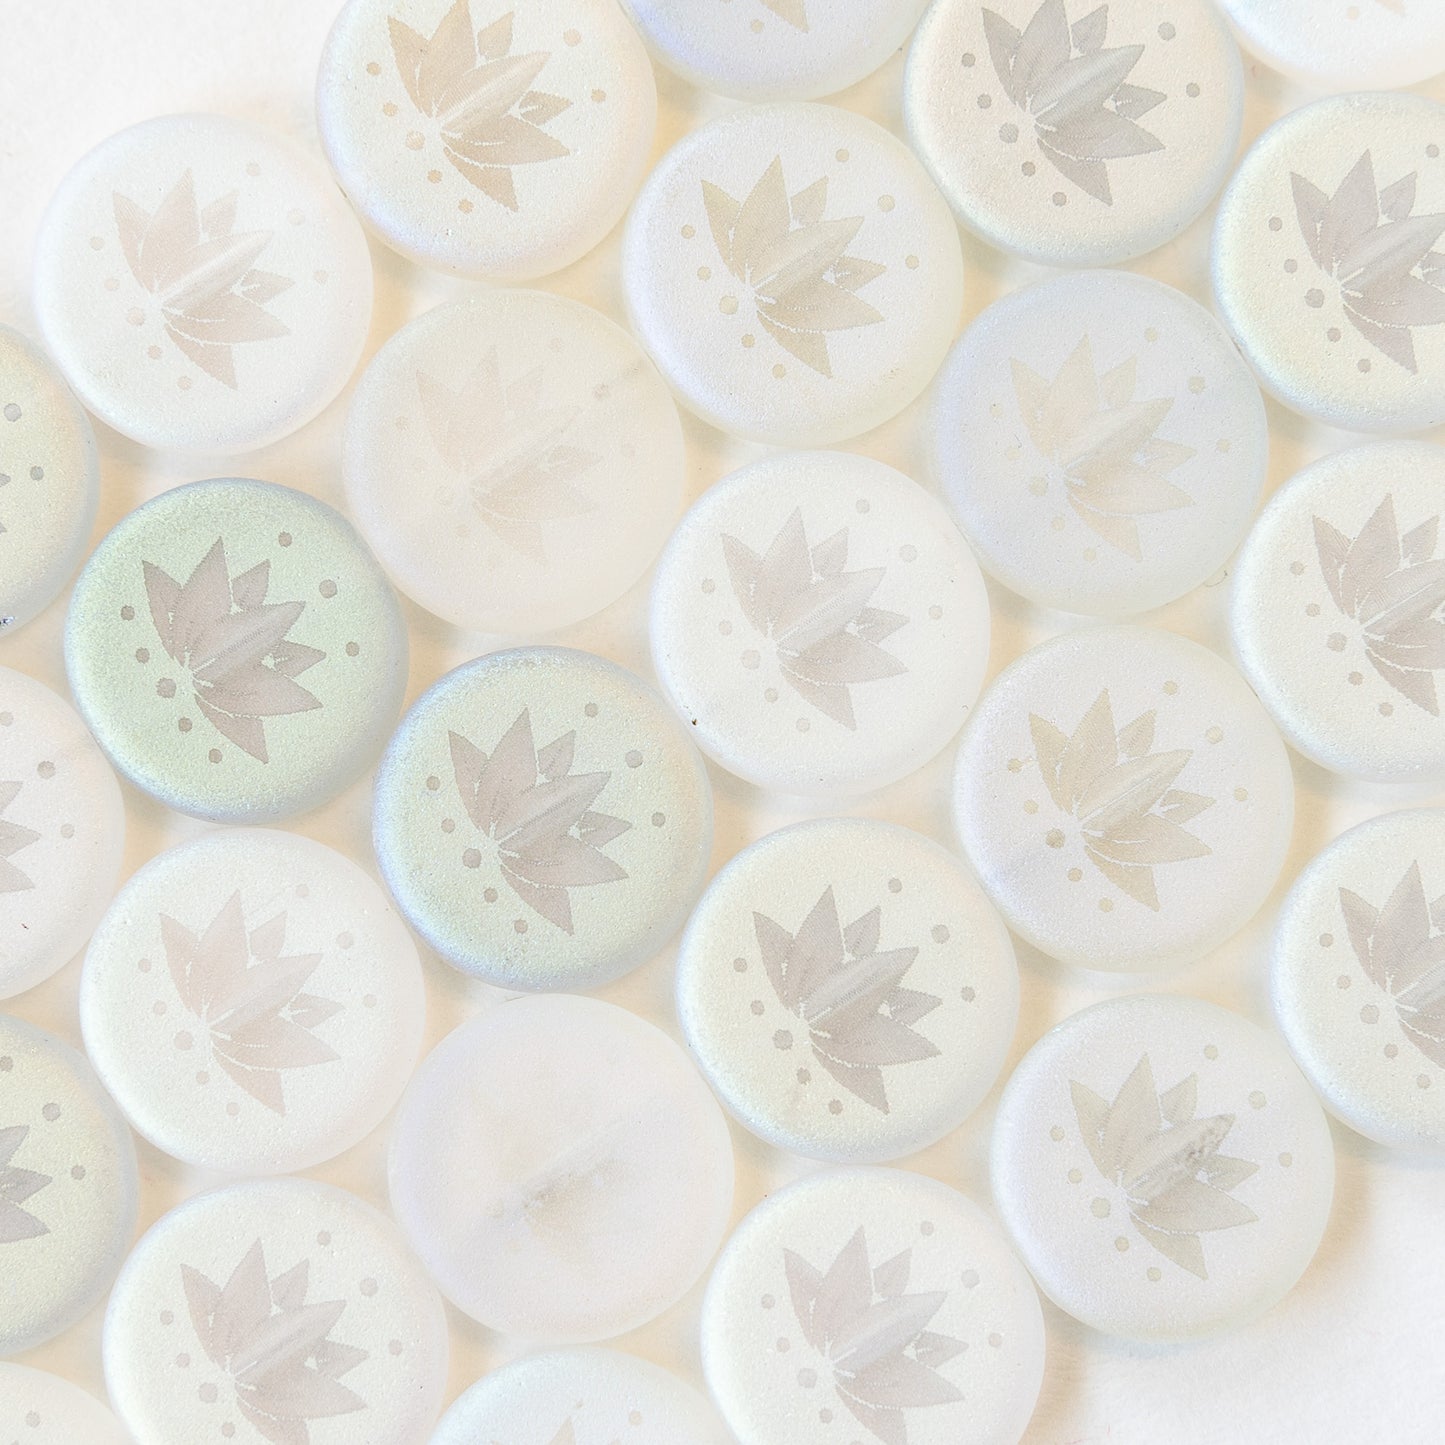 14mm Lotus Flower Coin Beads - Crystal Matte AB - 8 beads